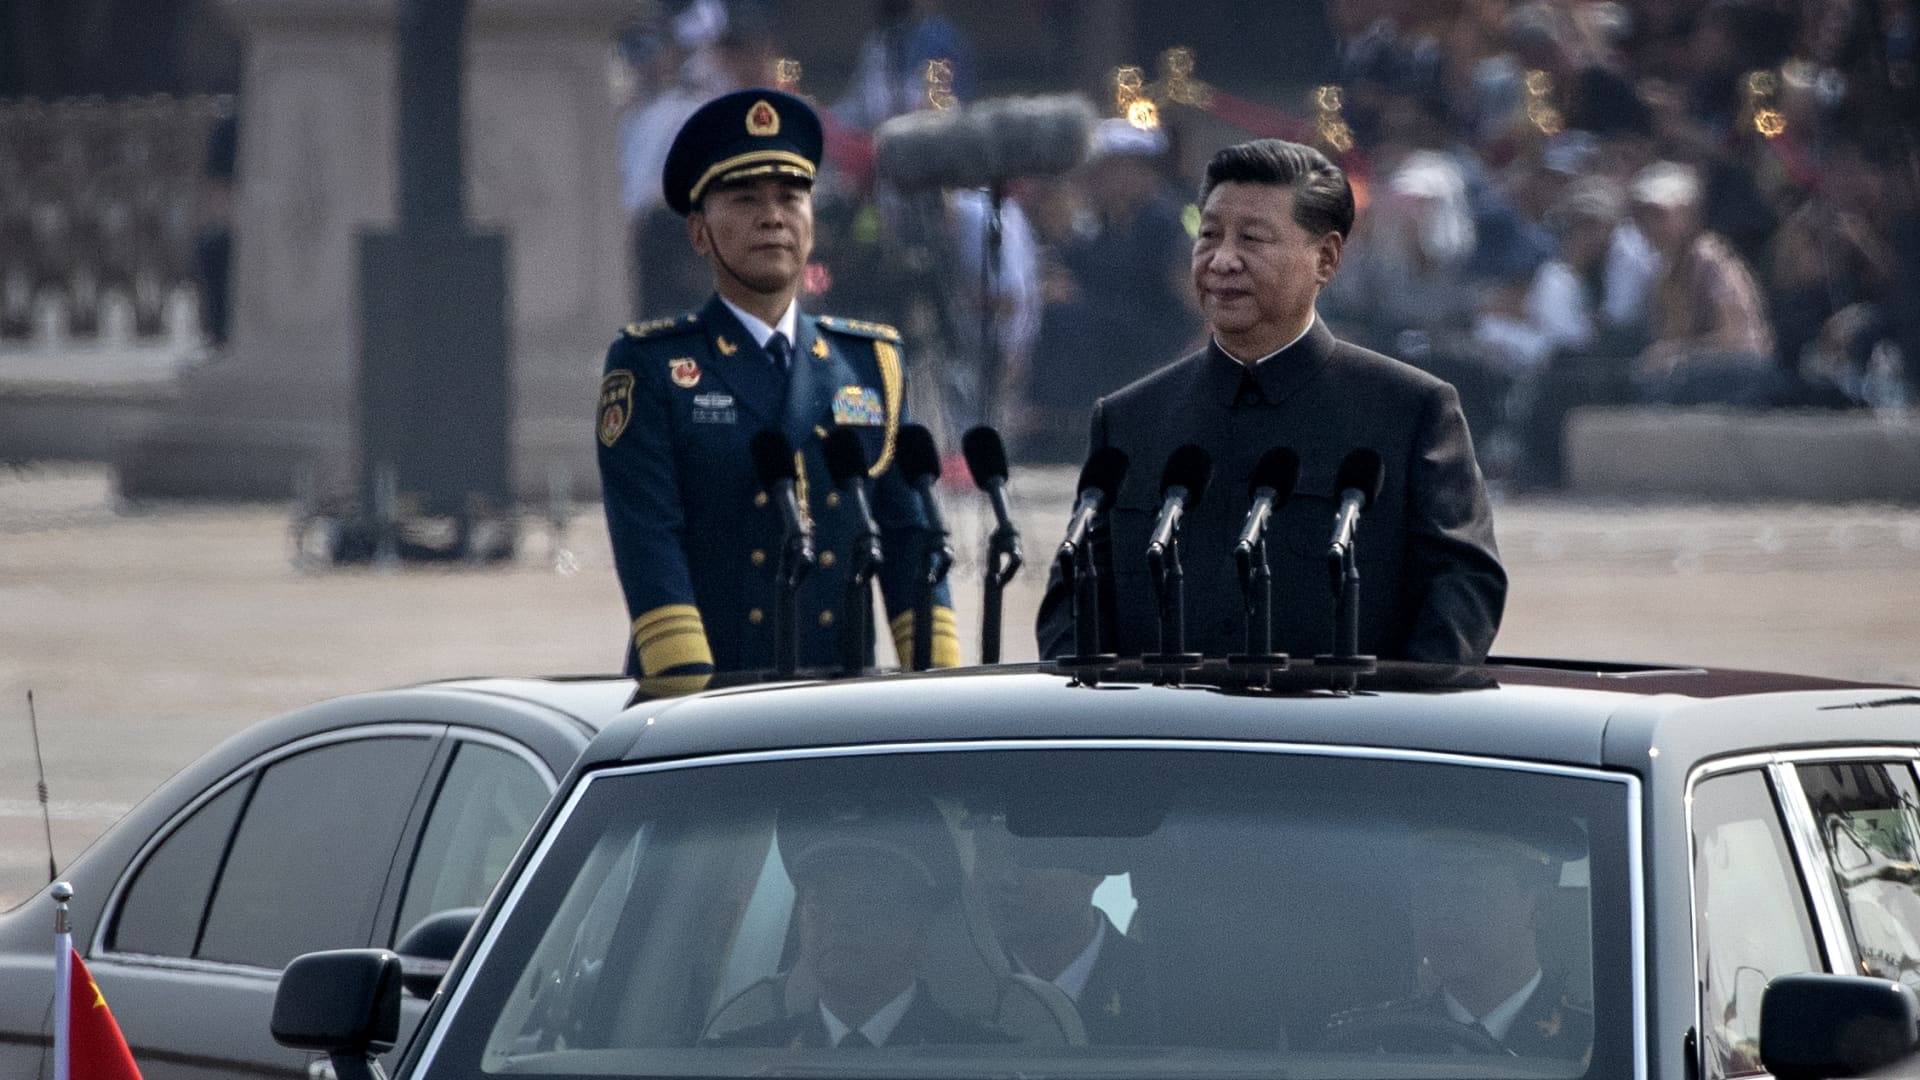 Chinese President Xi Jinping drives in a Hong Qi car after inspecting the troops during a parade to celebrate the 70th Anniversary of the founding of the People's Republic of China at Tiananmen Square in 1949, on October 1, 2019 in Beijing, China.